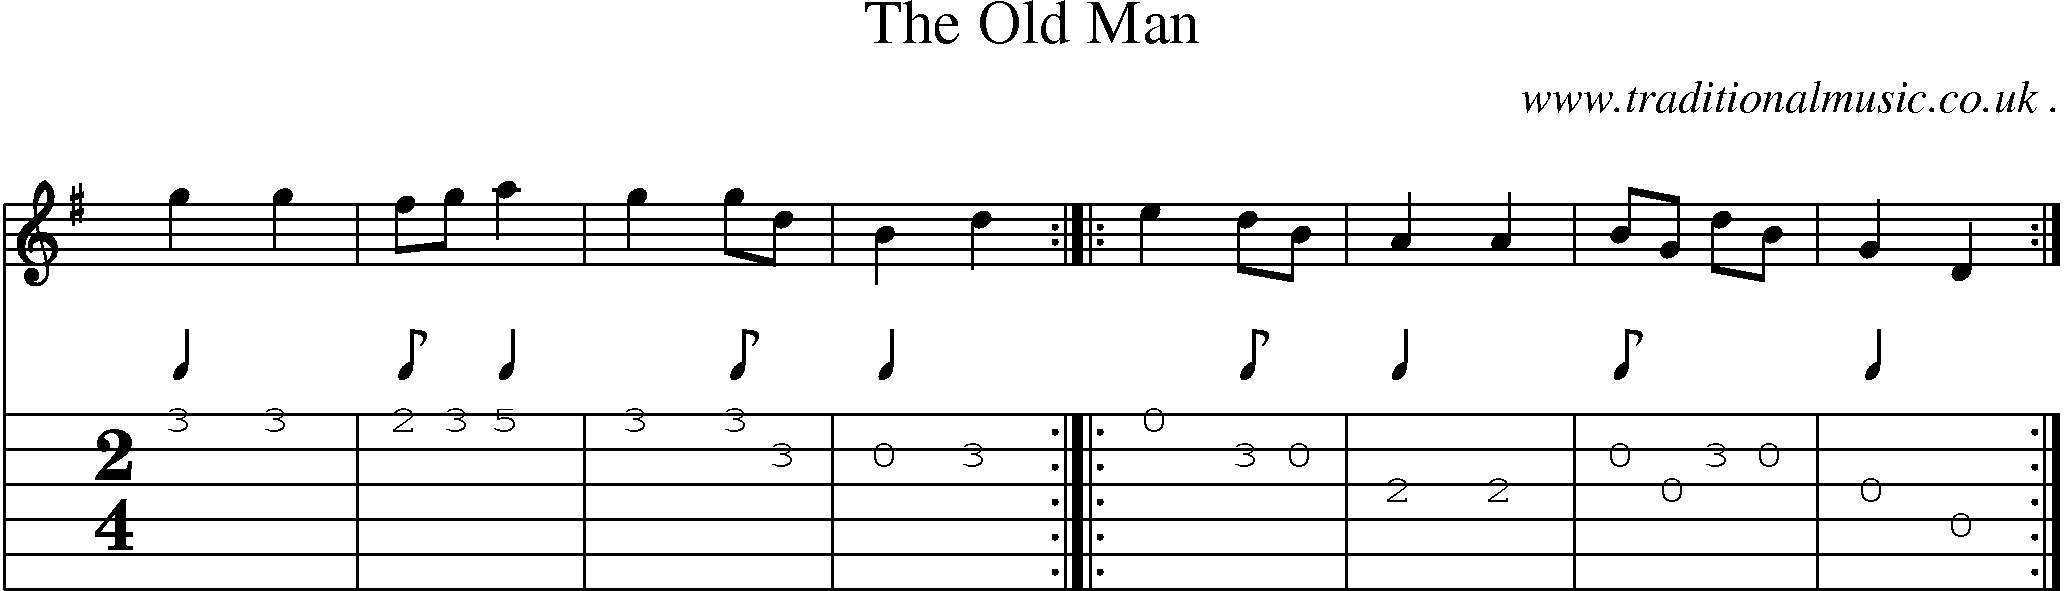 Sheet-music  score, Chords and Guitar Tabs for The Old Man